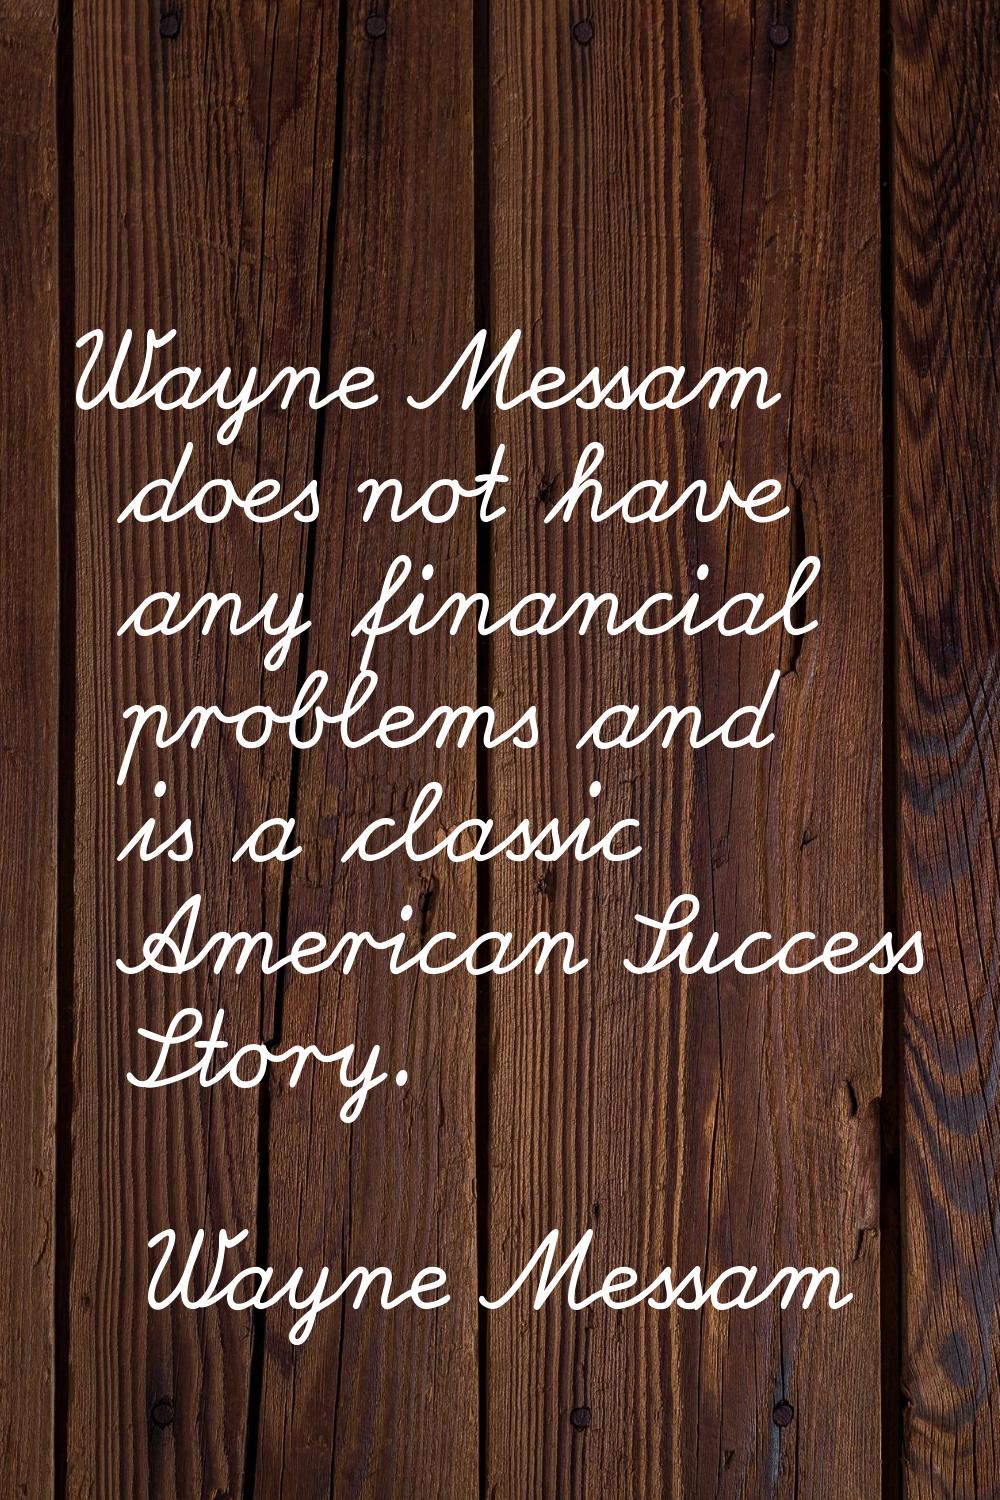 Wayne Messam does not have any financial problems and is a classic American Success Story.